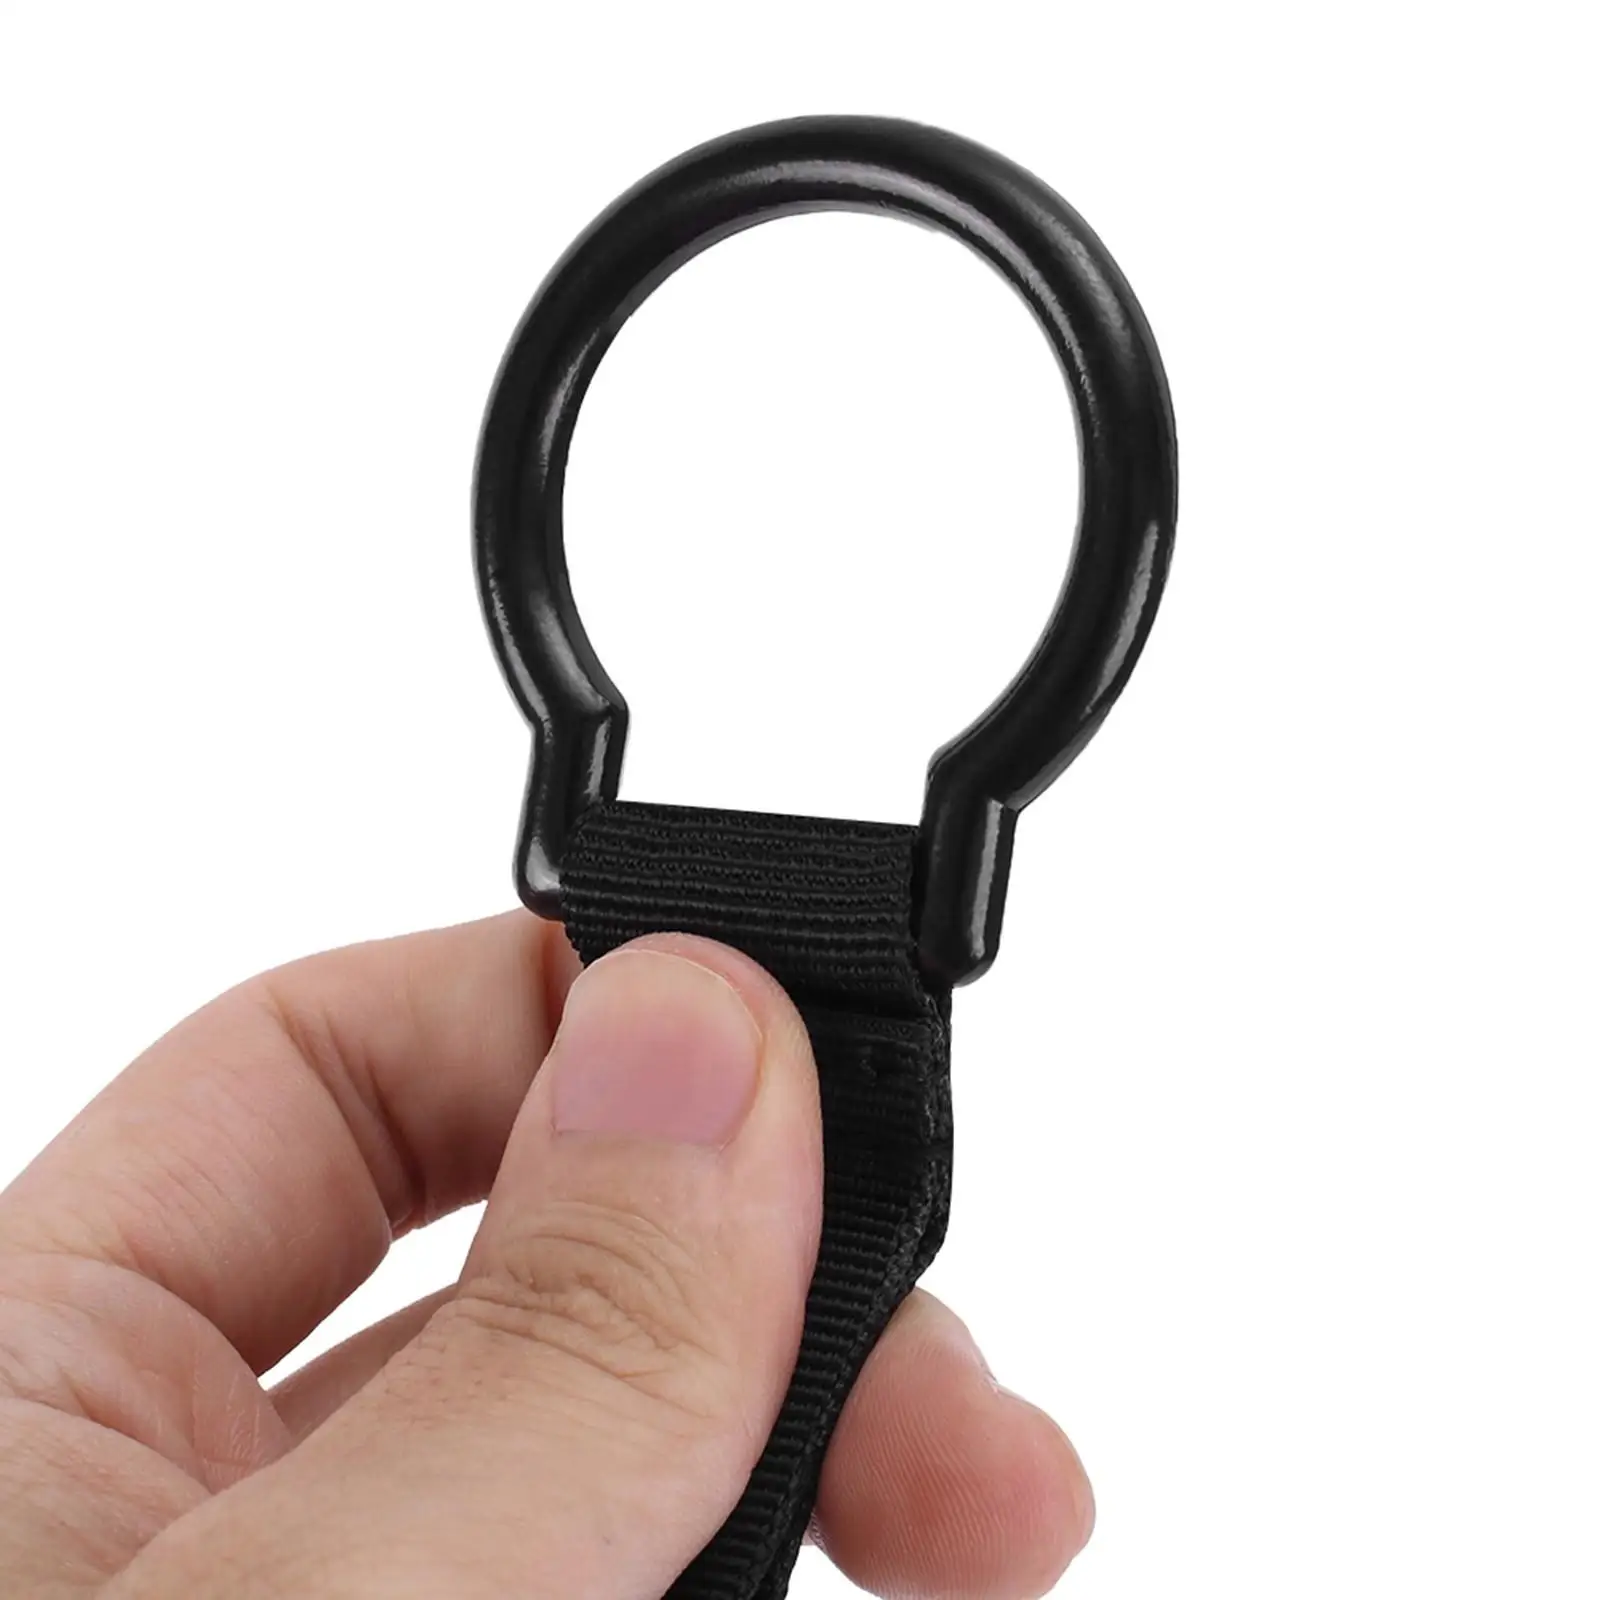 Flashlight Clip Hanging Ring Slide On Belt Replacement Ring Accessories Ring Holder Adjustment Flashlight Holder for Activities